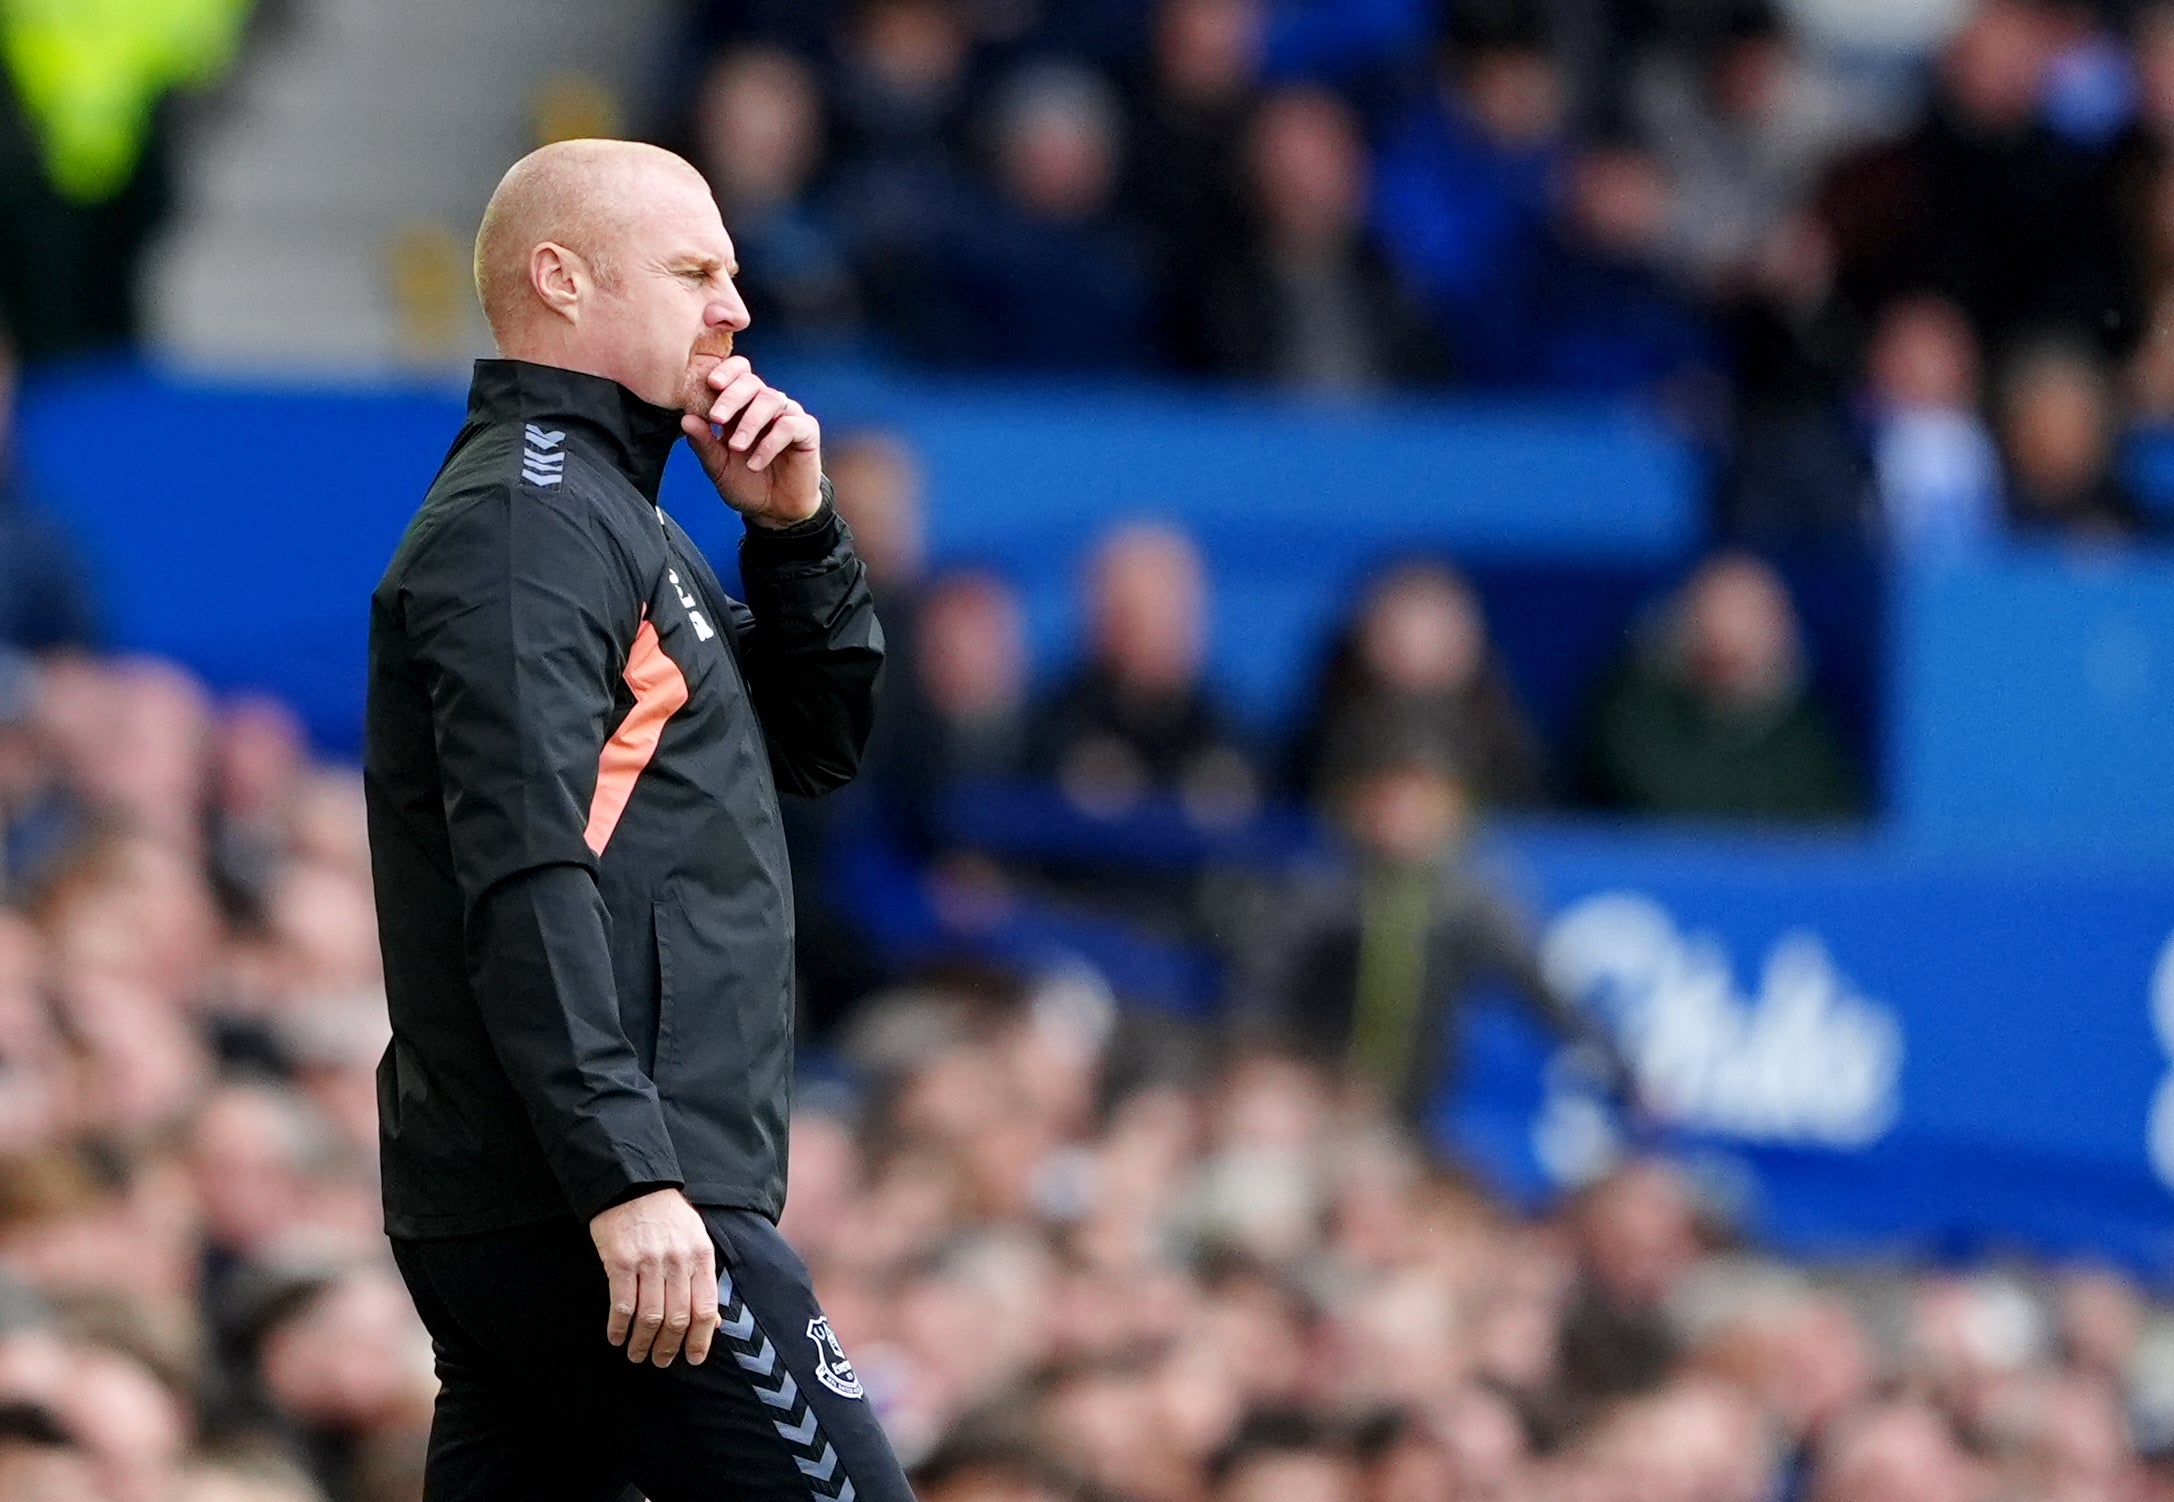 Phil Jagielka has praised the job done by Sean Dyche, pictured, in guiding Everton through troubled times (Peter Byrne/PA)